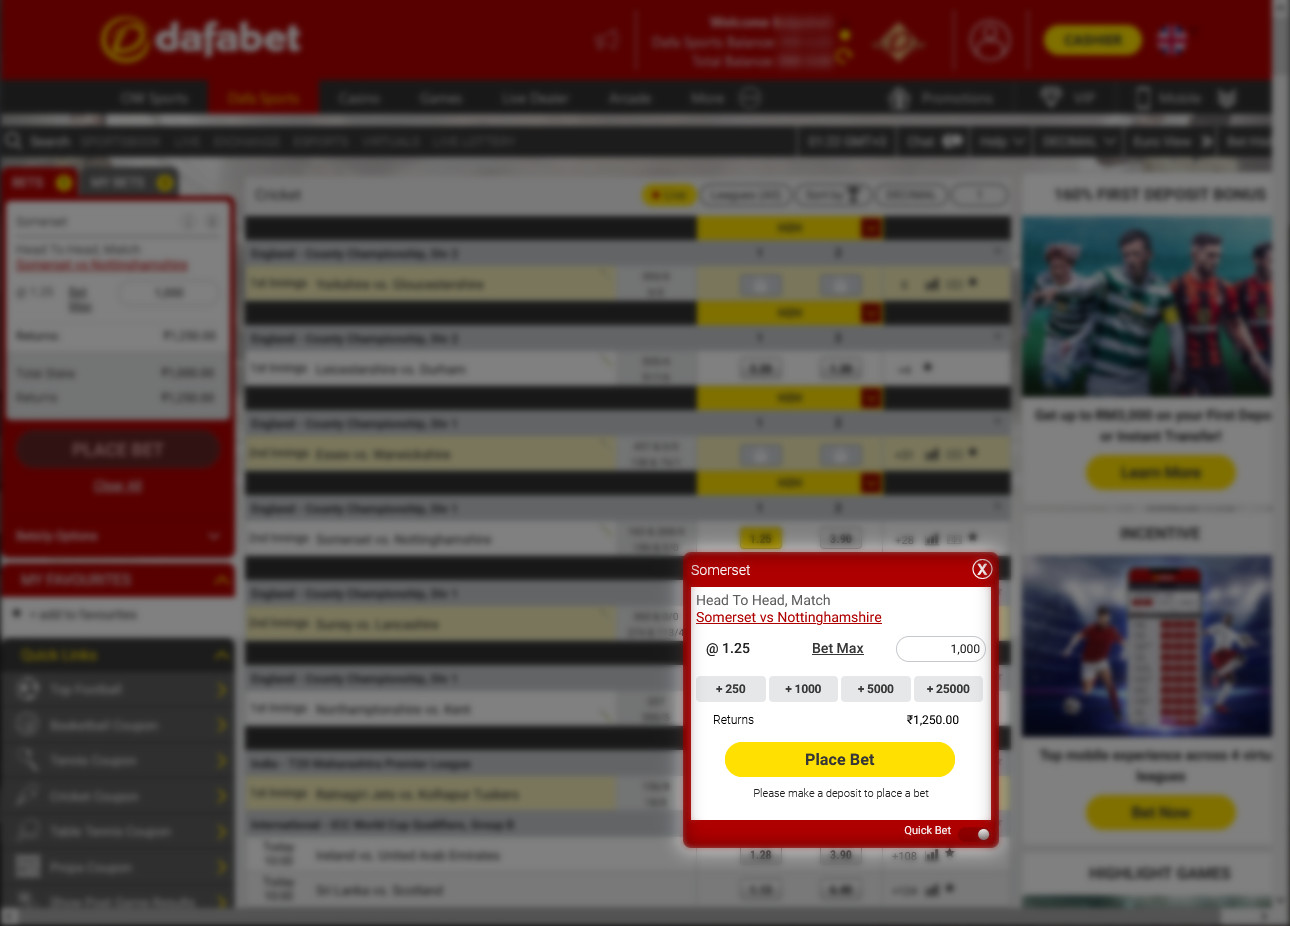 Betting form on the Dafabet website